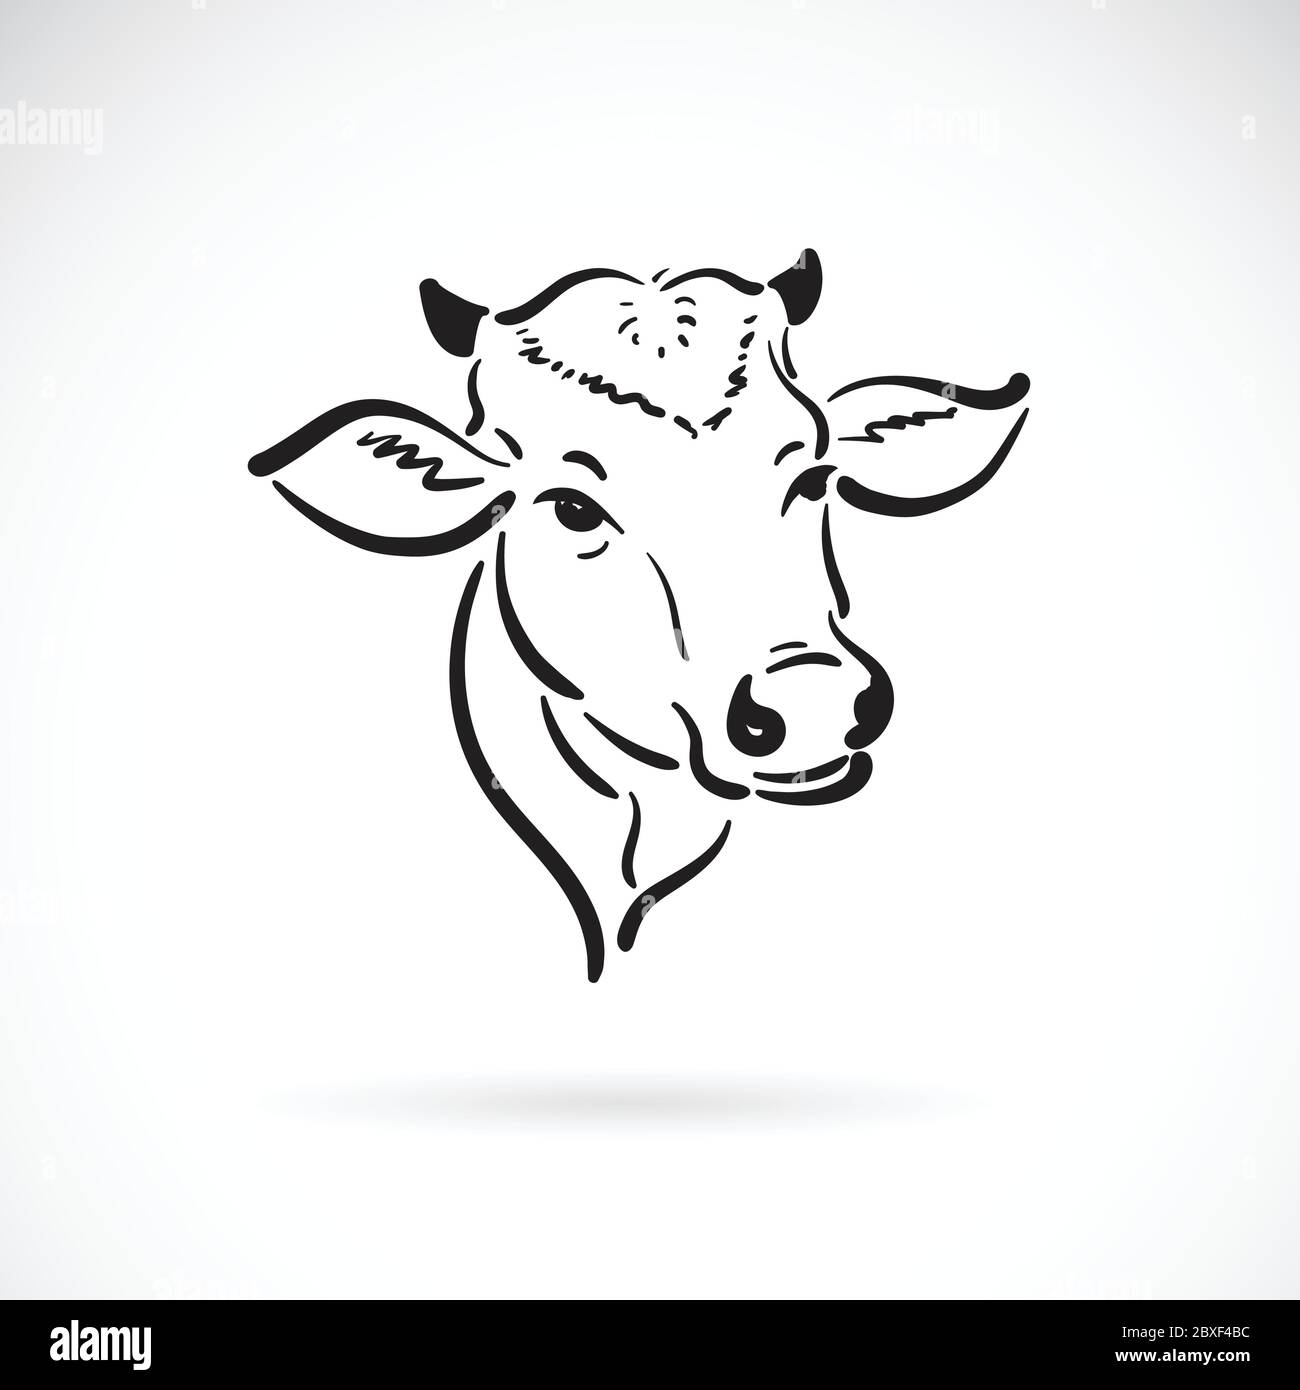 Vector of a cow head design on white background. Farm Animal. Cows logos or icons. Easy editable layered vector illustration. Stock Vector